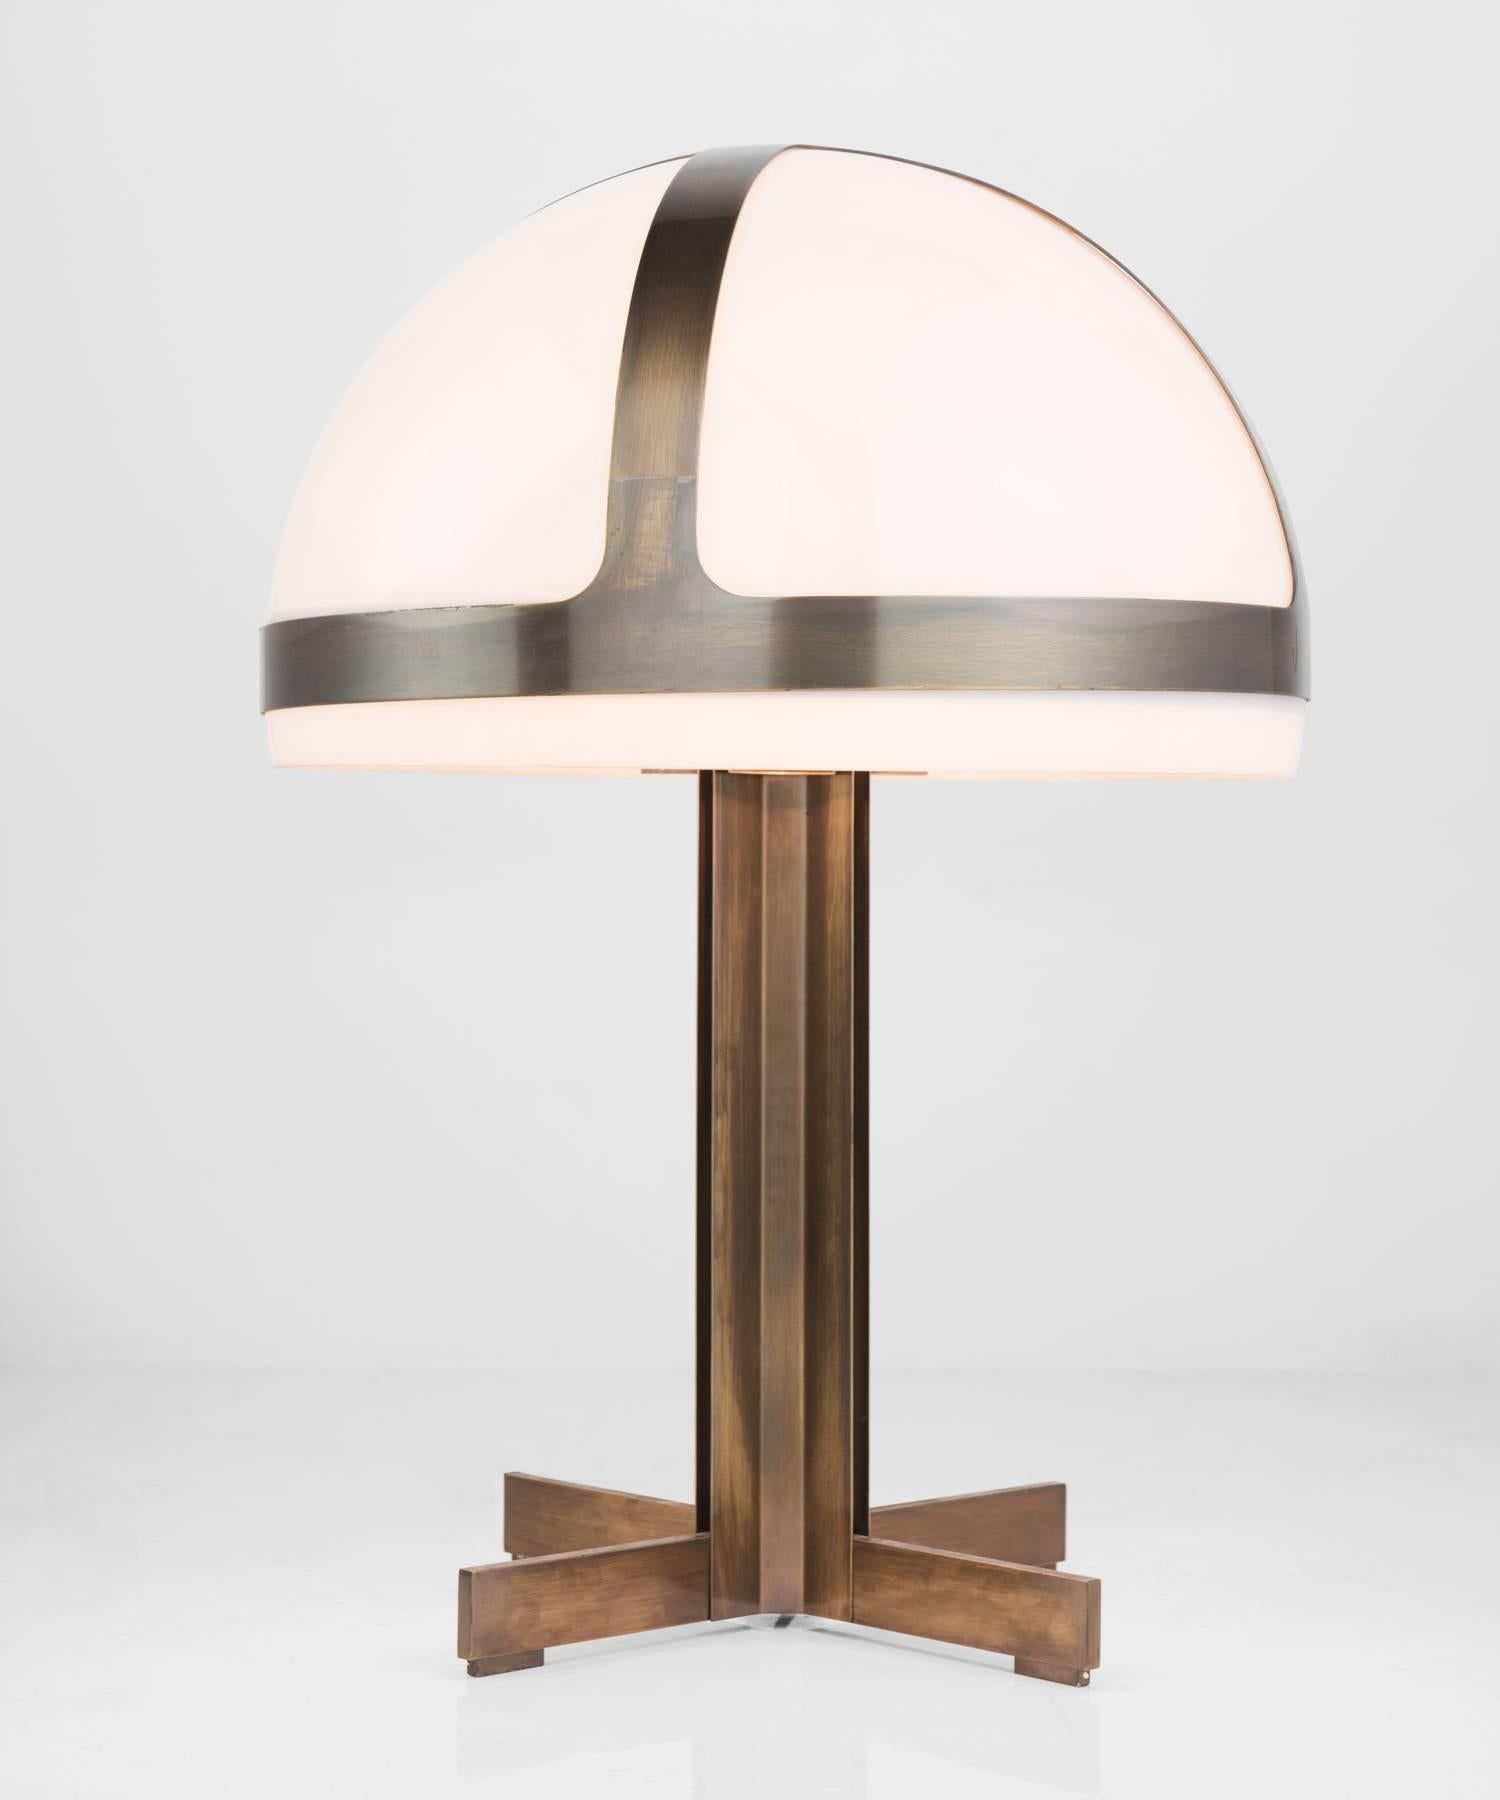 Bronze table lamp, circa 1970.

Large geometric form with bronze detailing around plexiglass shade. Fabricated by Brüll and Gruber, Munich.